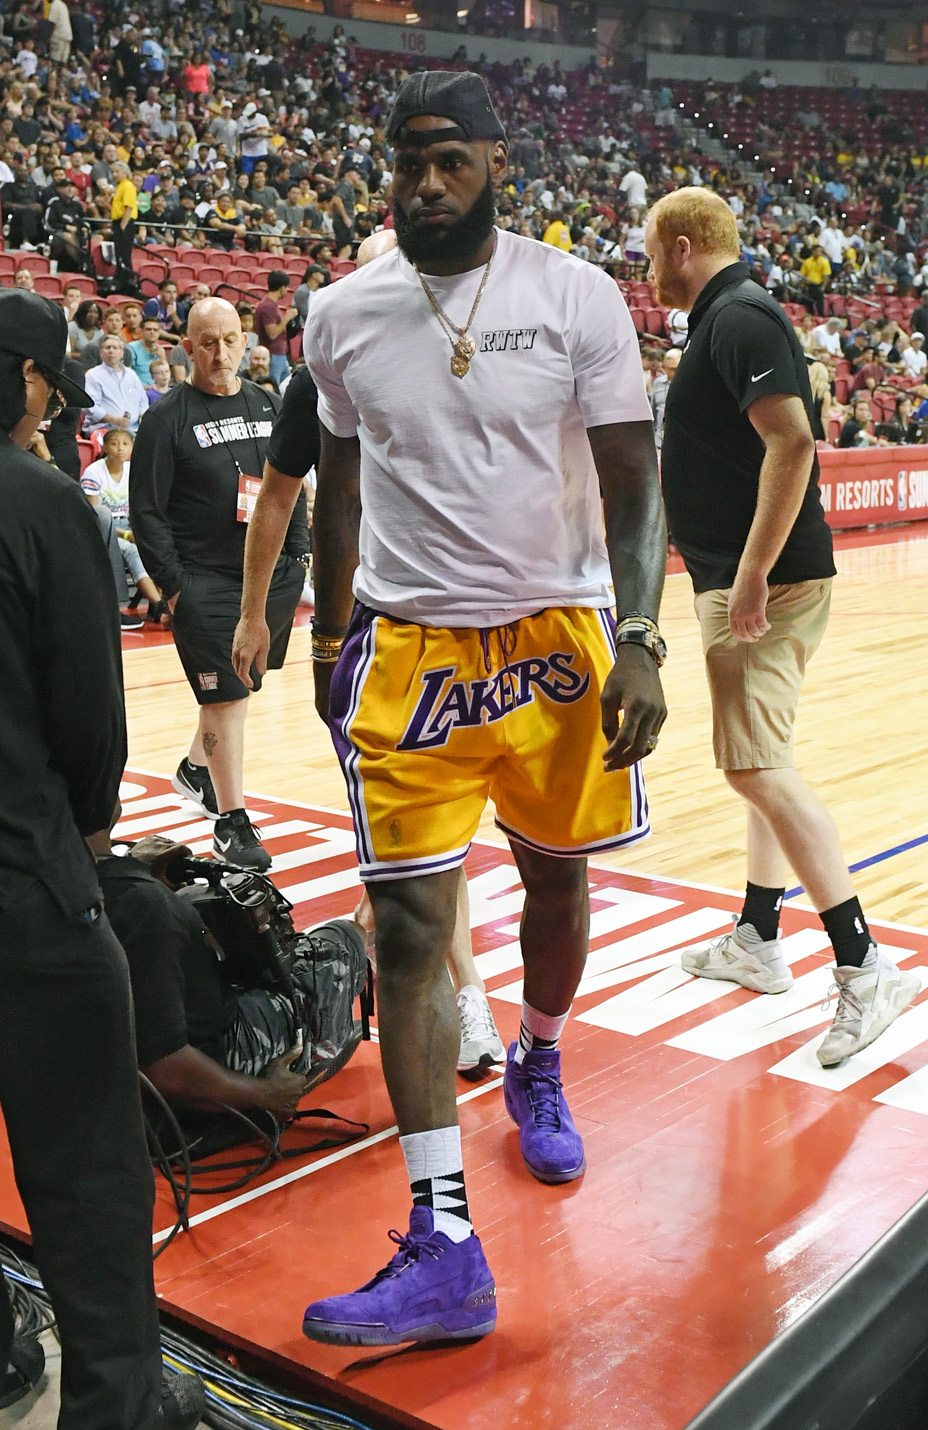 Lebron James' outfit